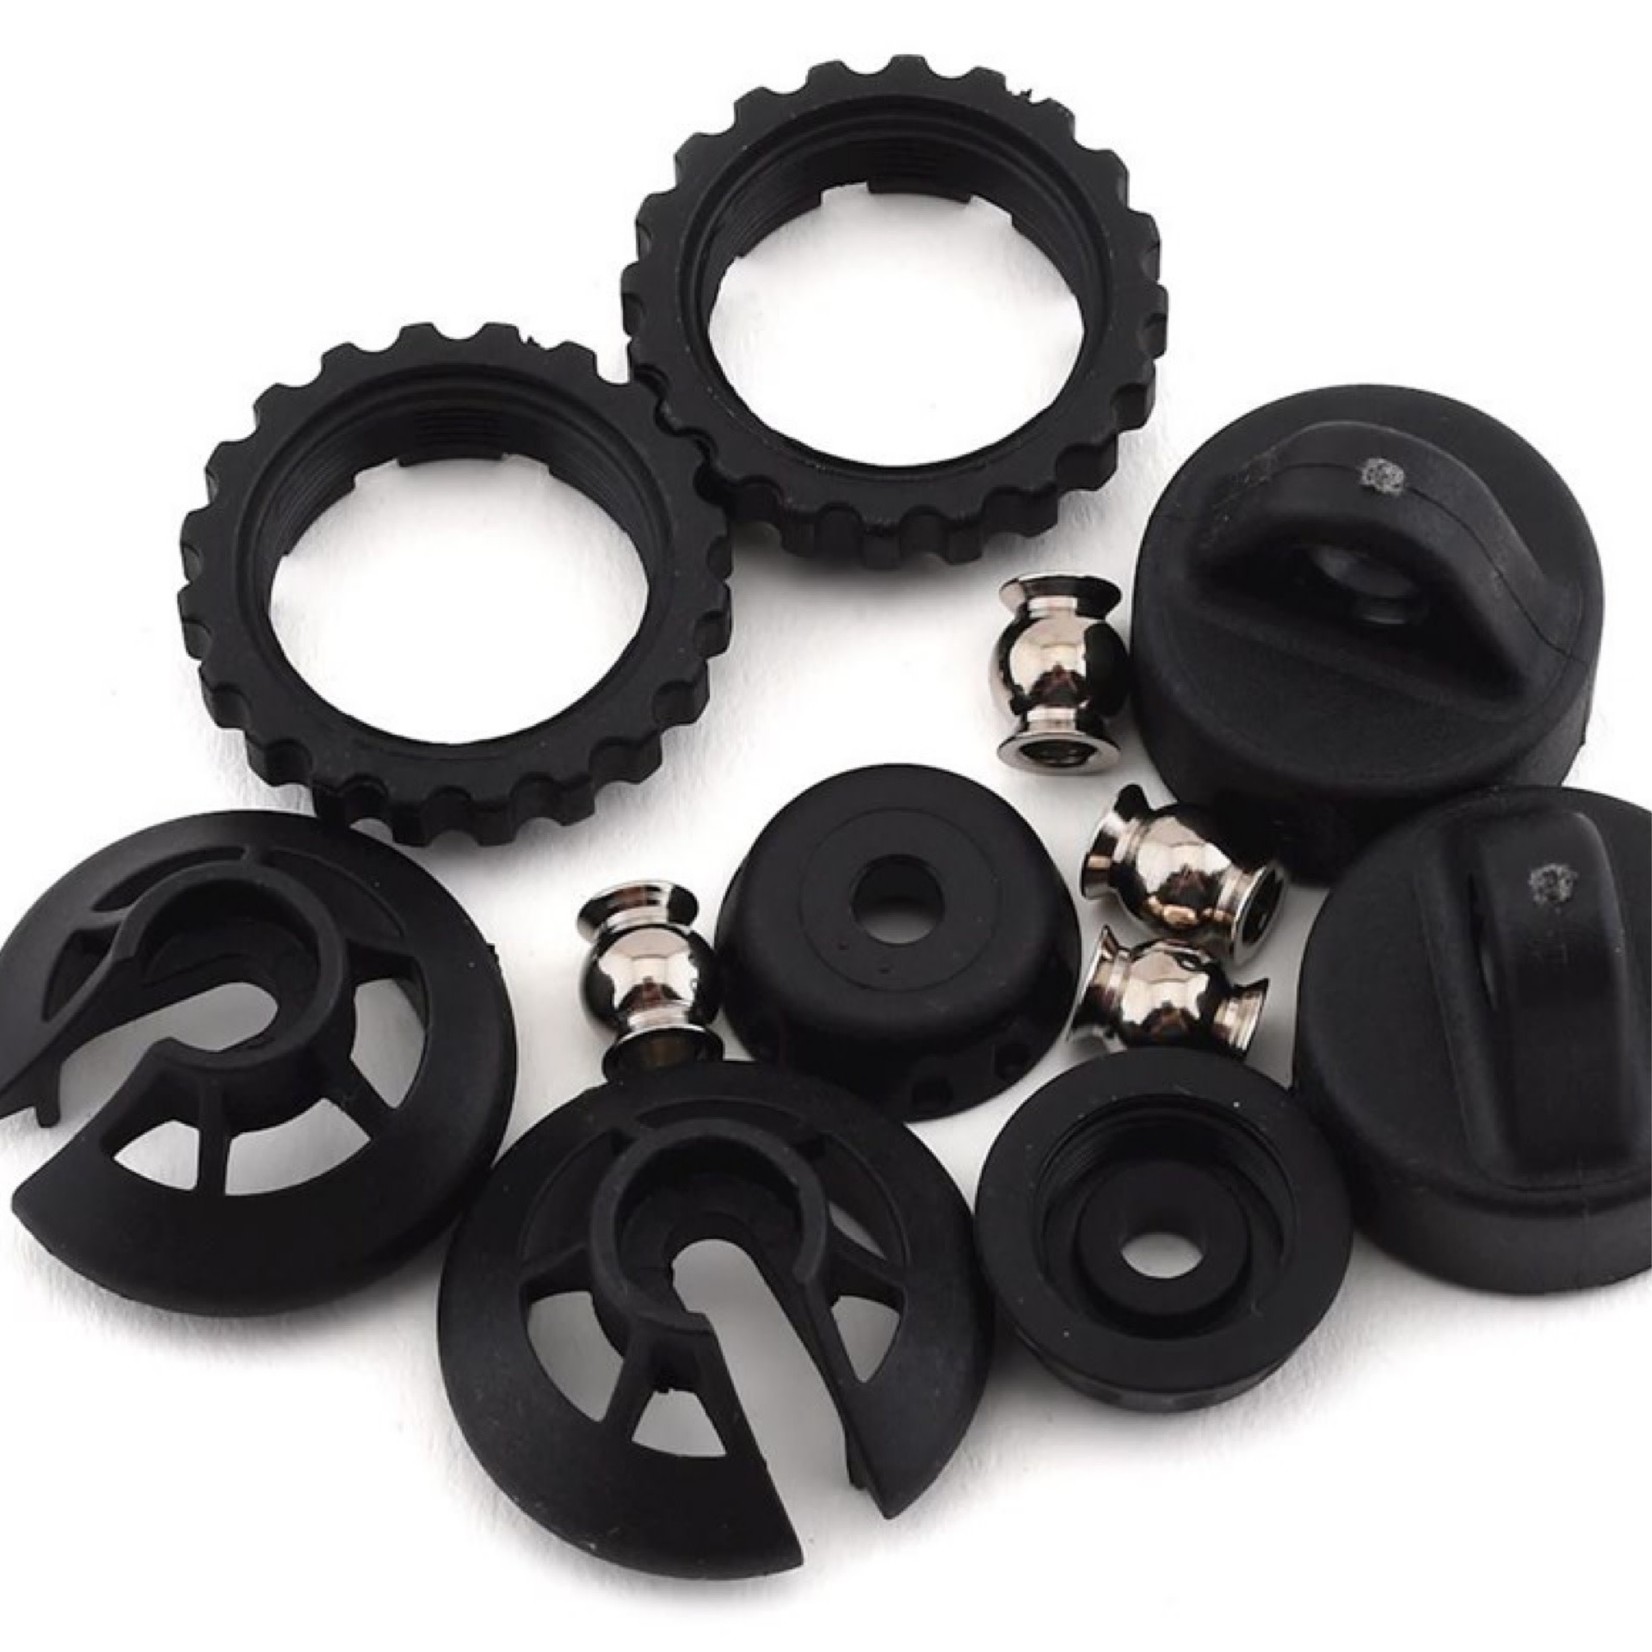 Traxxas Traxxas GTR Shock Caps And Spring Retainers  #5465